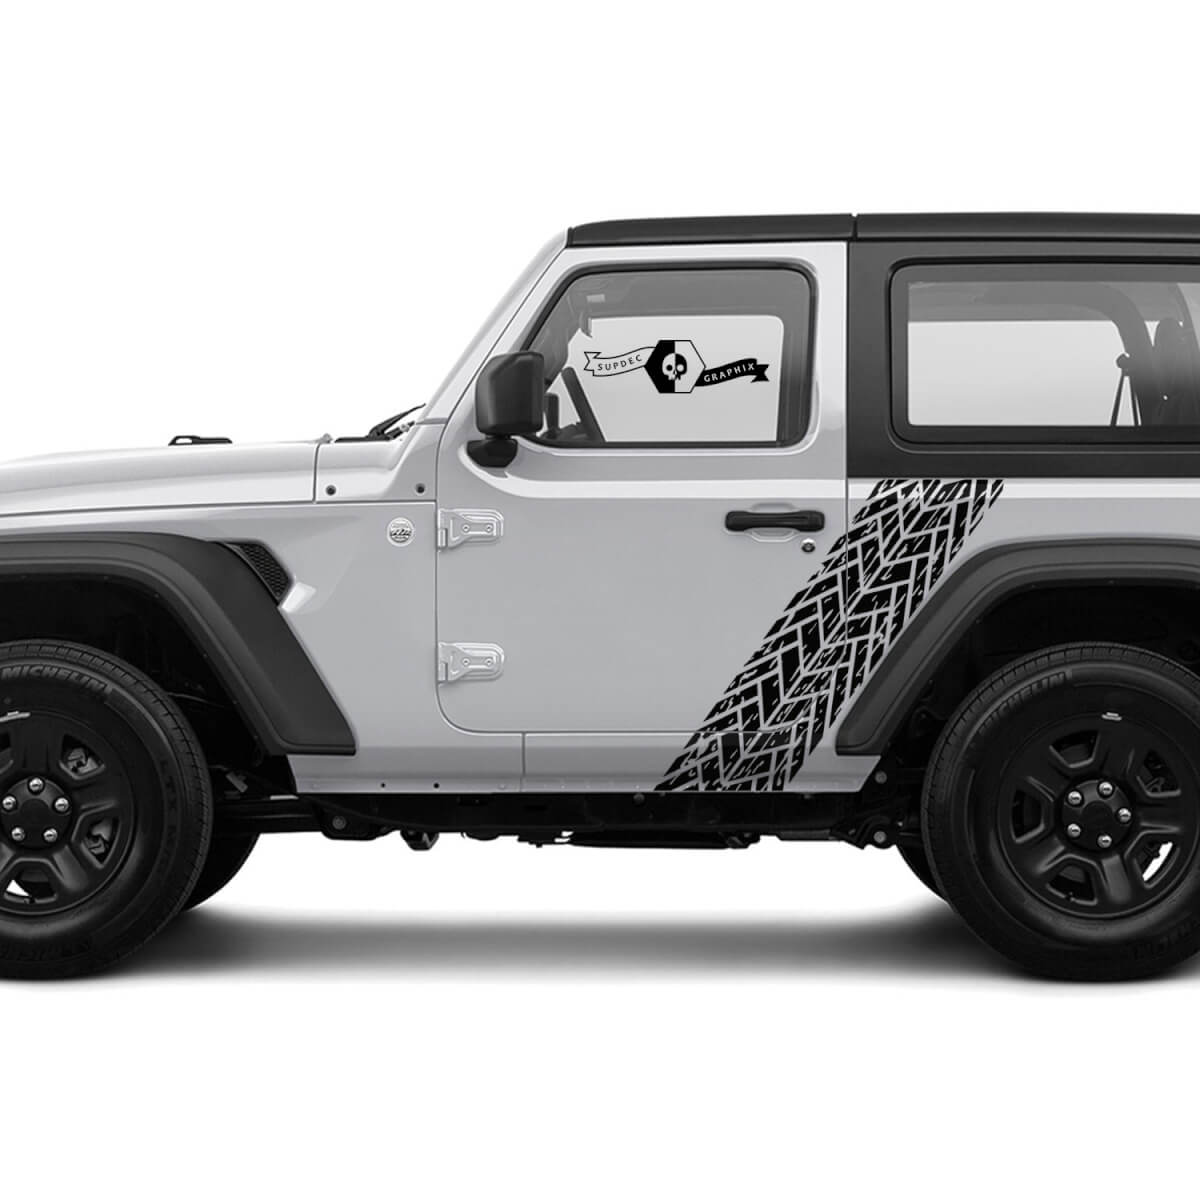 2 New JEEP Wrangler Stripe with Destroyed Tire Track Door side Graphics Decal Sticker